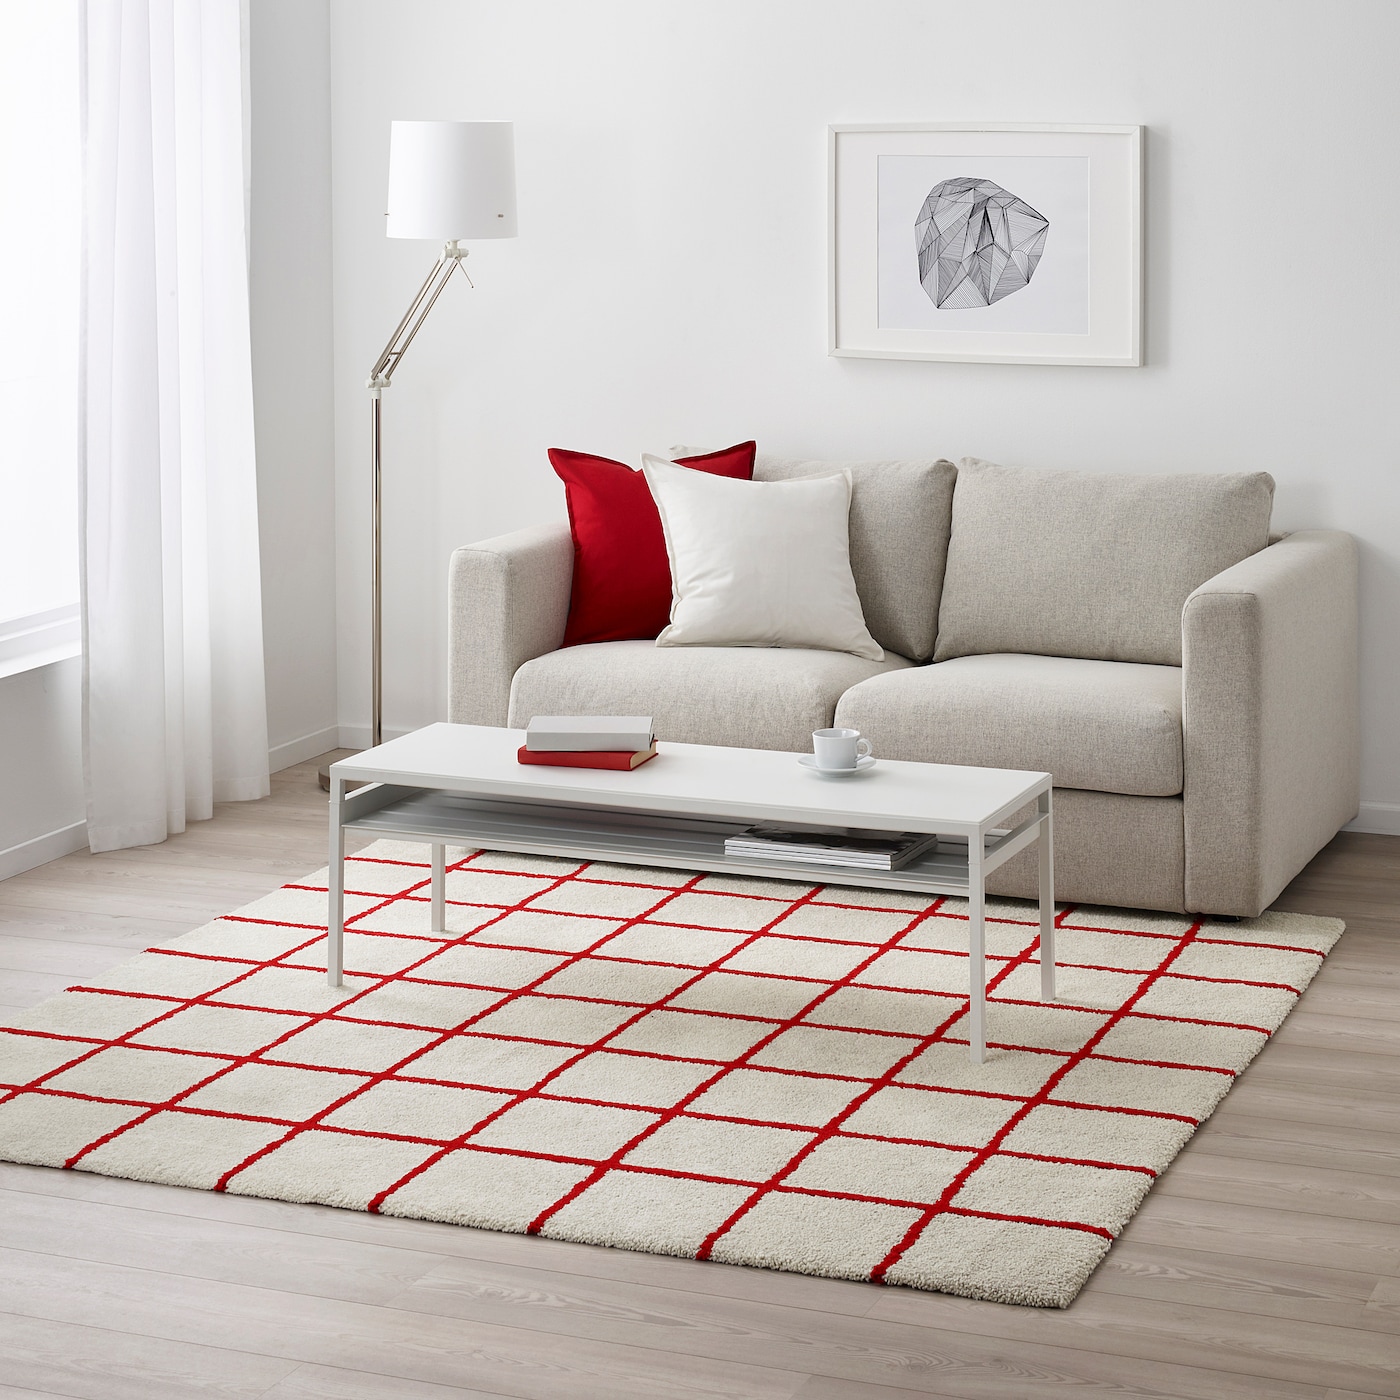 These Versatile Ikea Rugs Have True, Black And White Striped Rugs Ikea